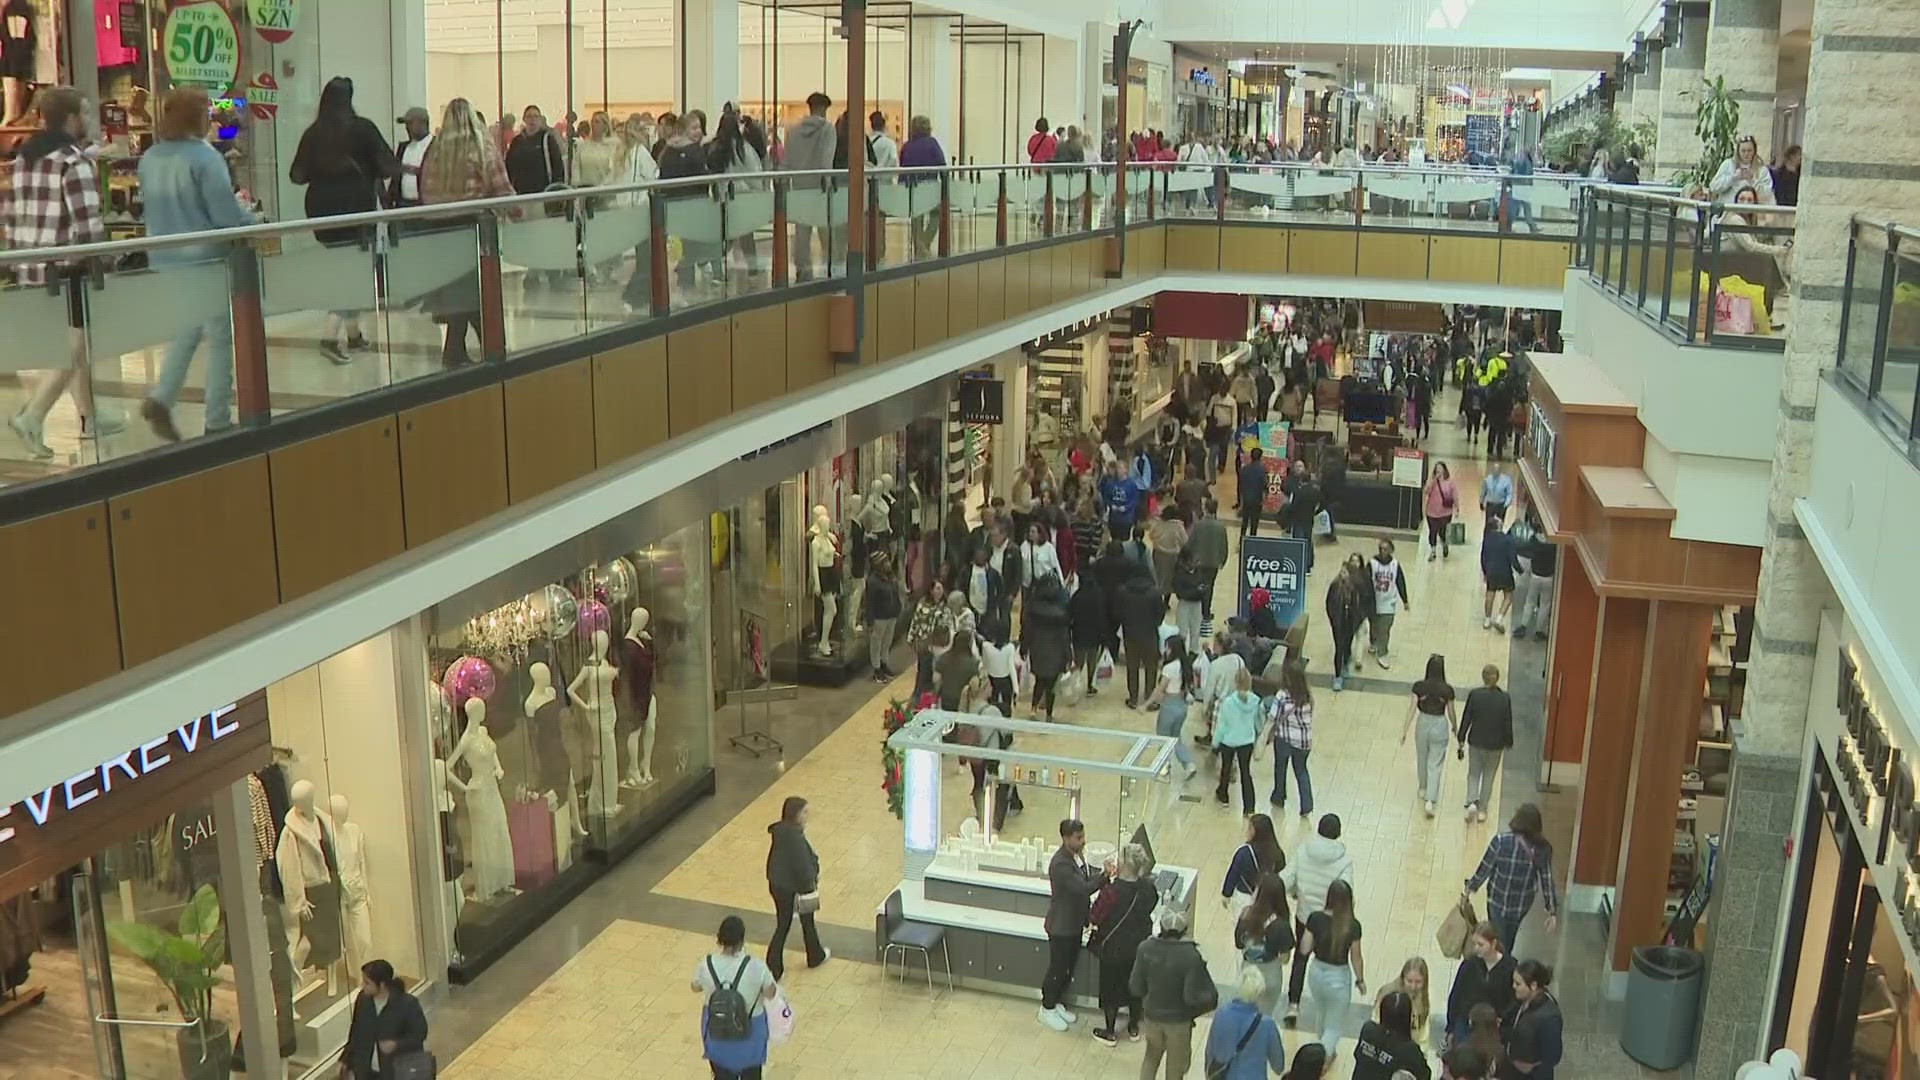 Shoppers say discounts ranged from low to deep discounts. Long lines and traffic were the themes of the day.